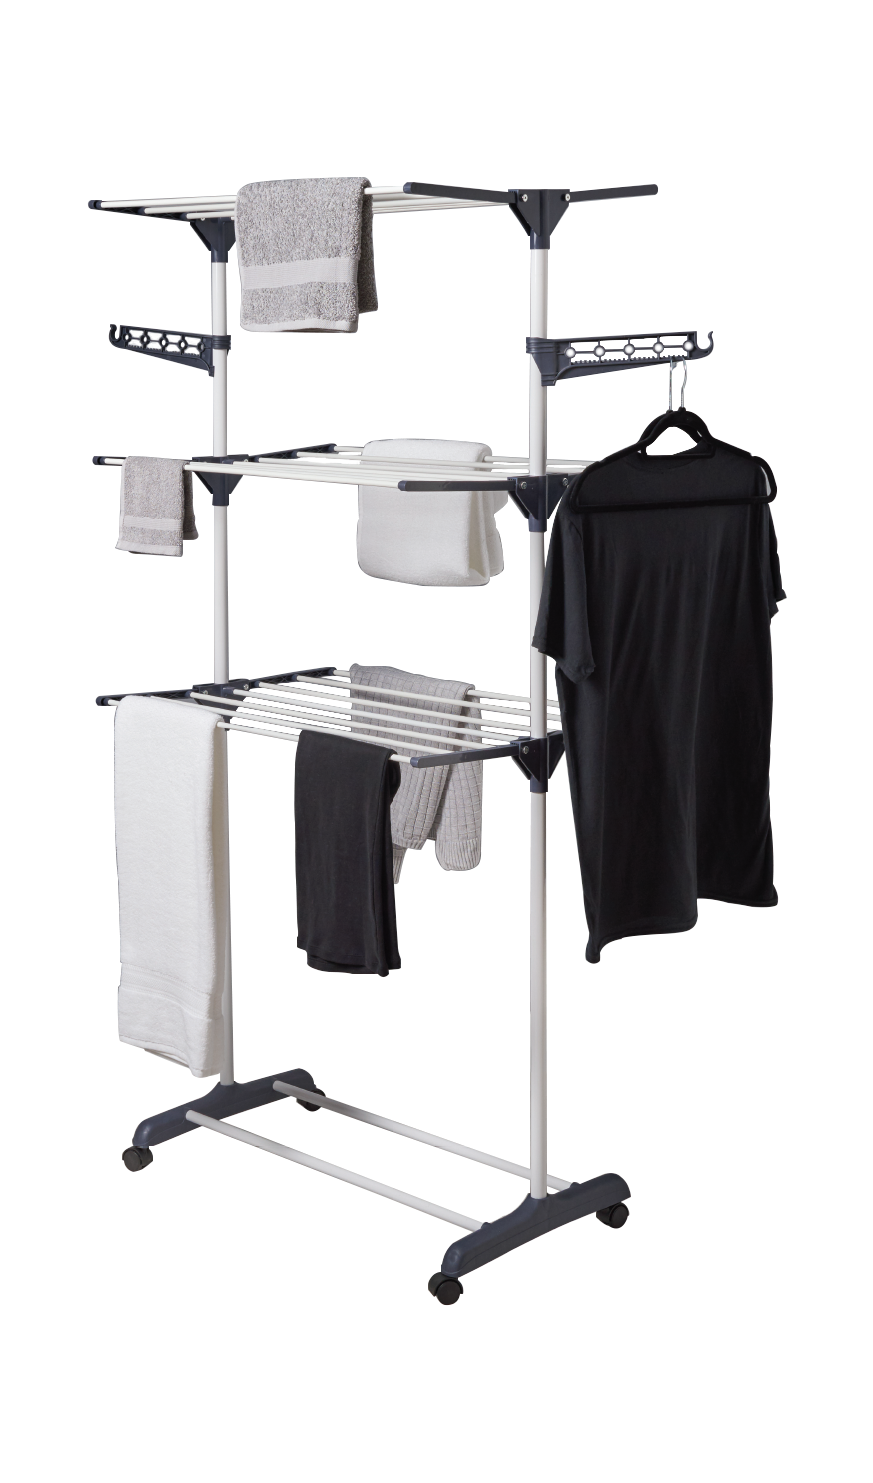 HOUZE - Ficar 3-Tier Foldable Rolling Clothes Drying Rack